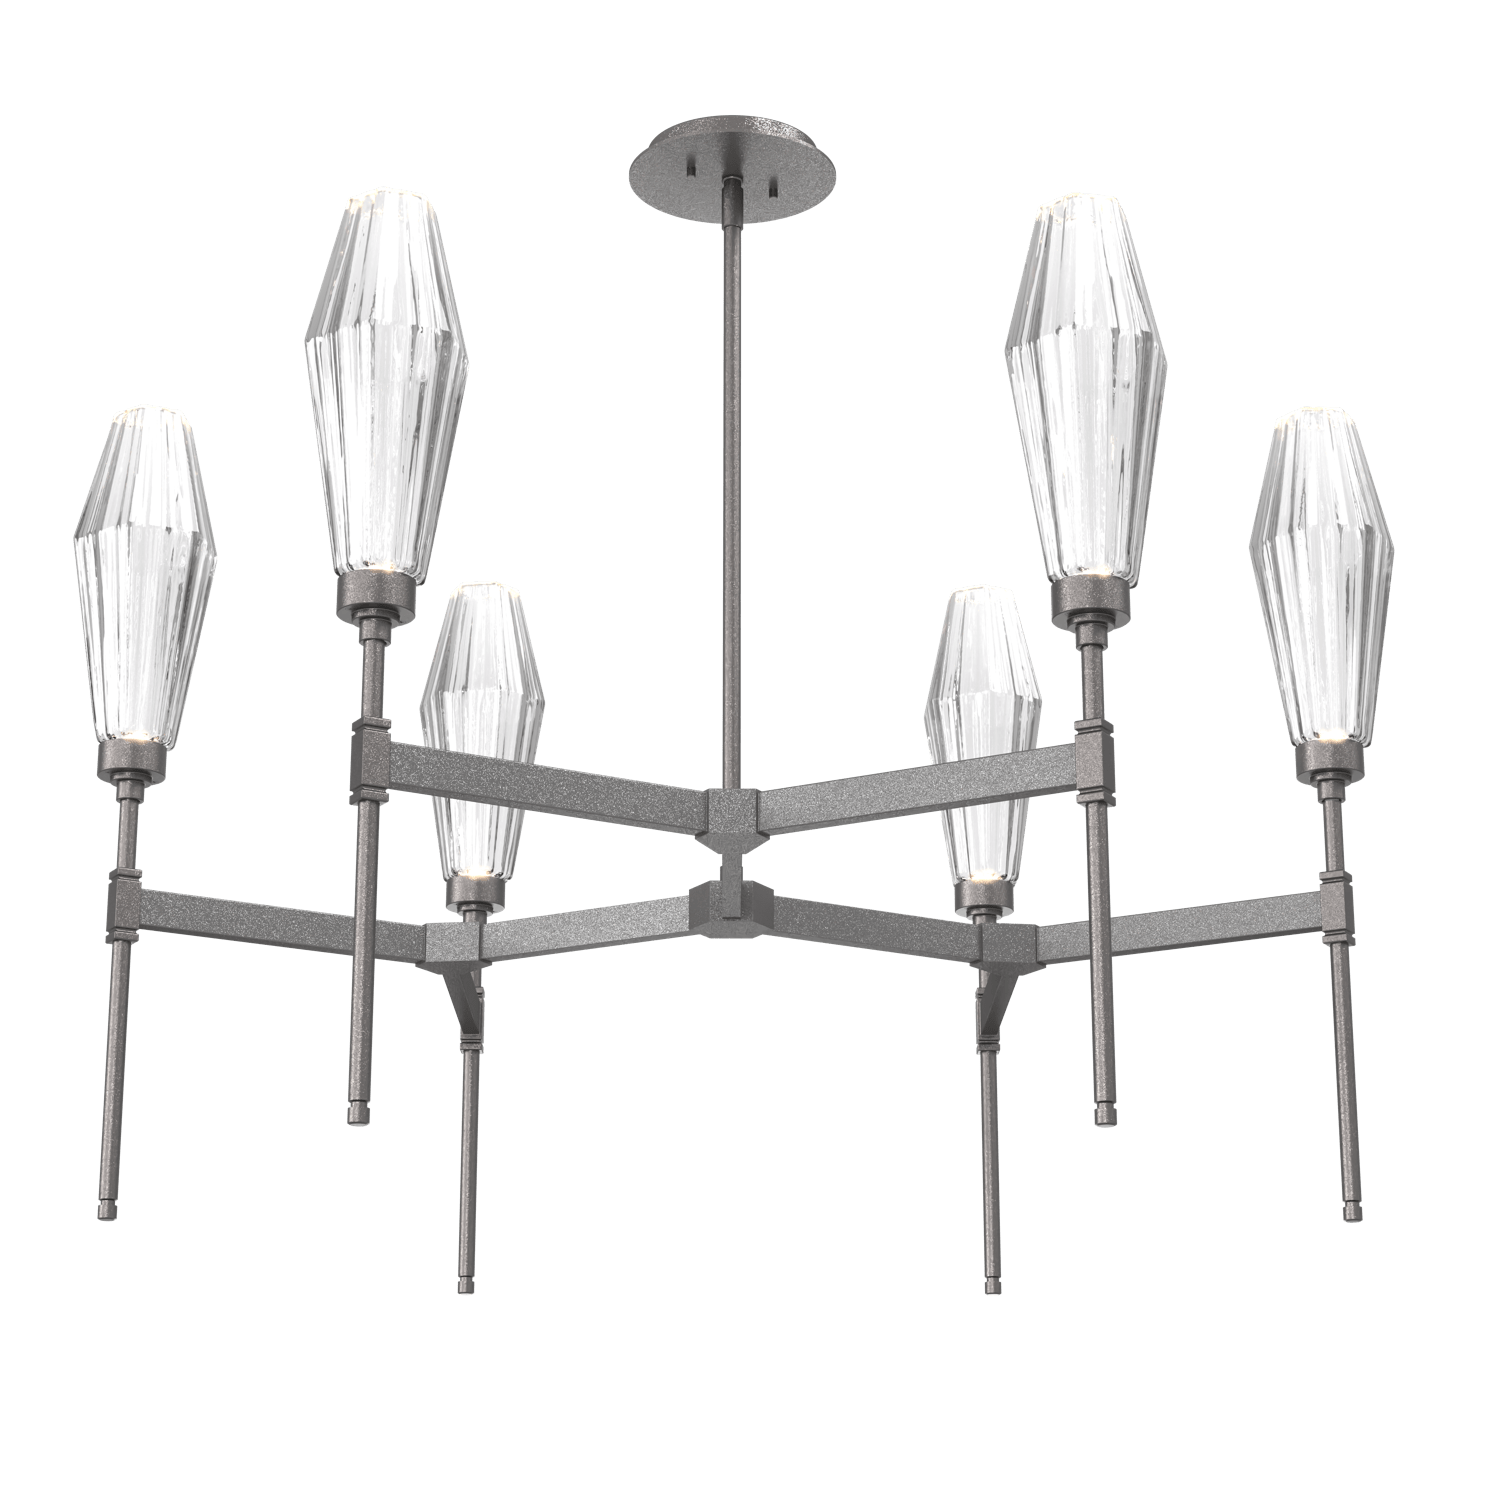 CHB0049-37-GP-RC-Hammerton-Studio-Aalto-37-inch-round-belvedere-chandelier-with-graphite-finish-and-optic-ribbed-clear-glass-shades-and-LED-lamping